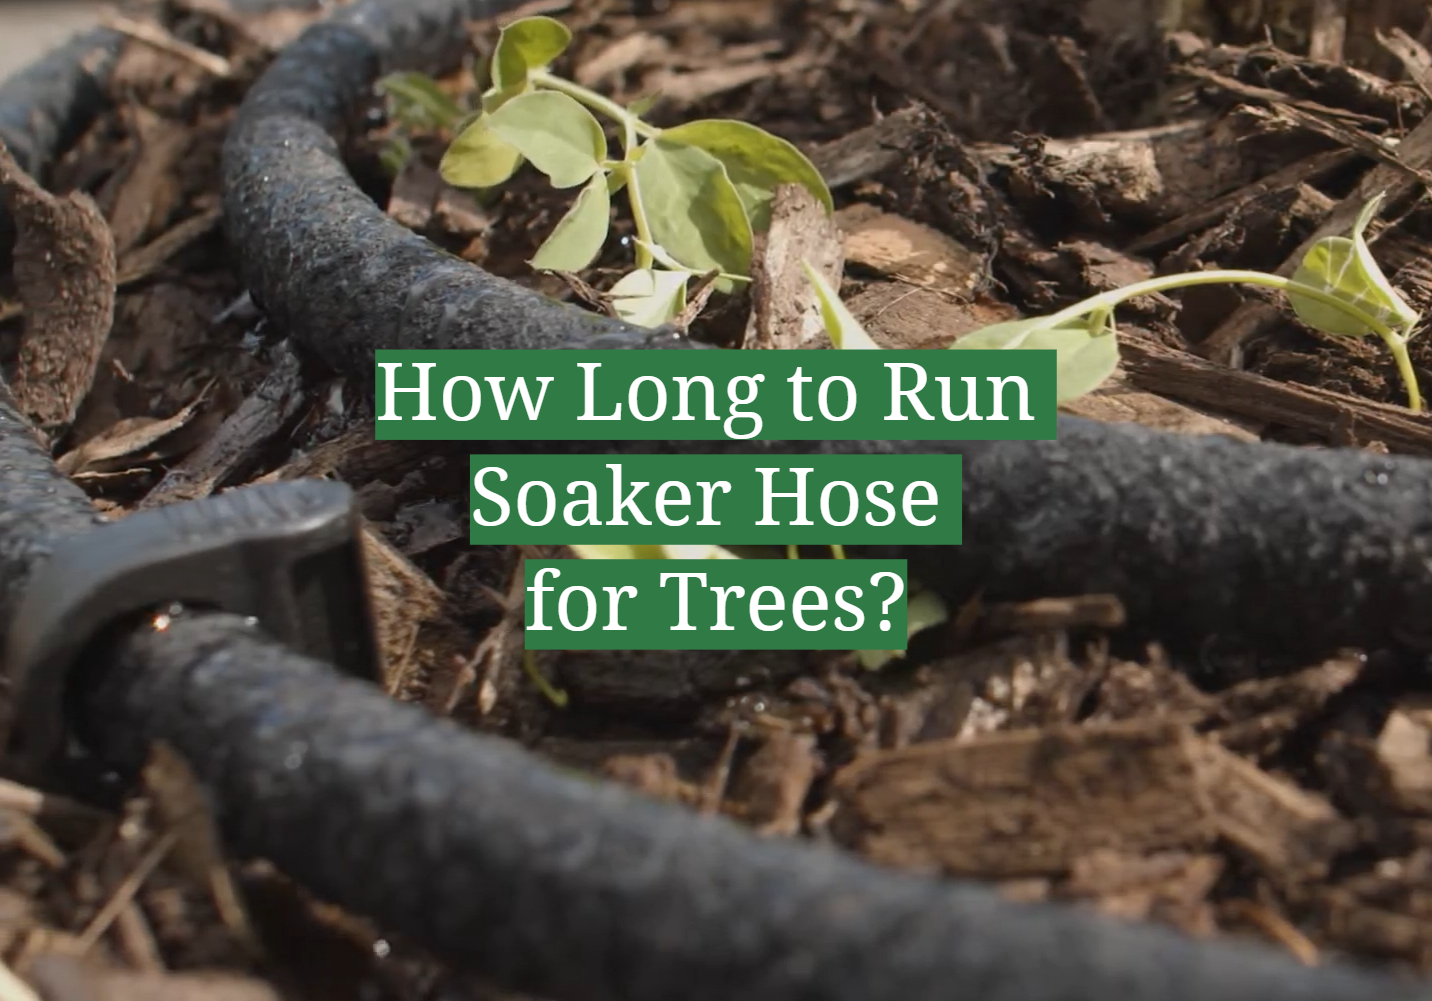 How Long to Run Soaker Hose for Trees?